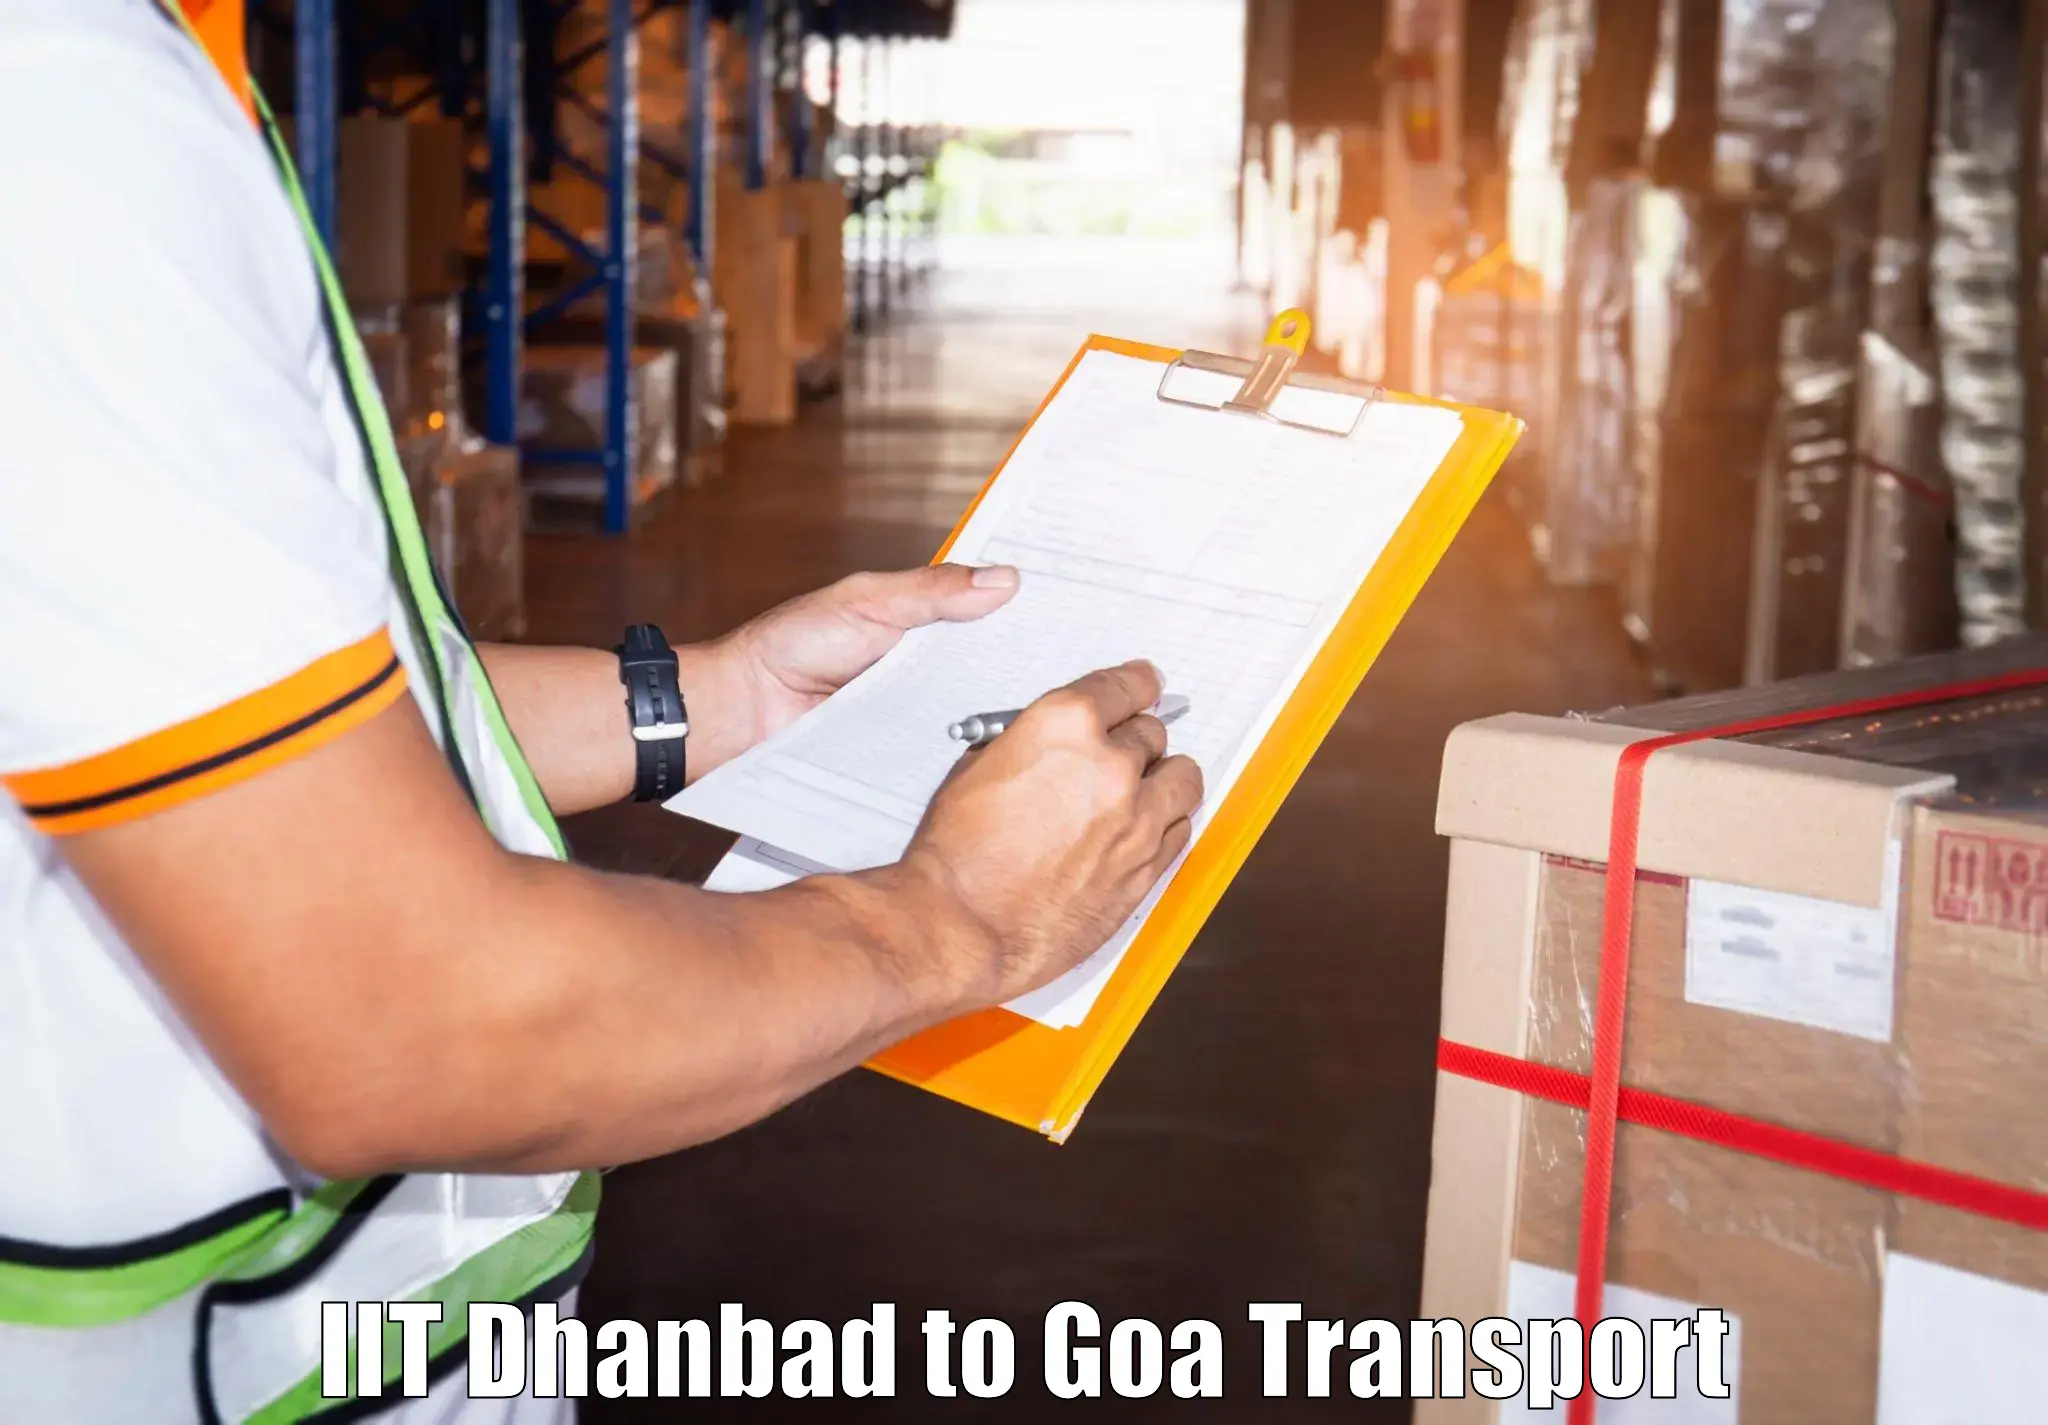 Transport shared services in IIT Dhanbad to Goa University